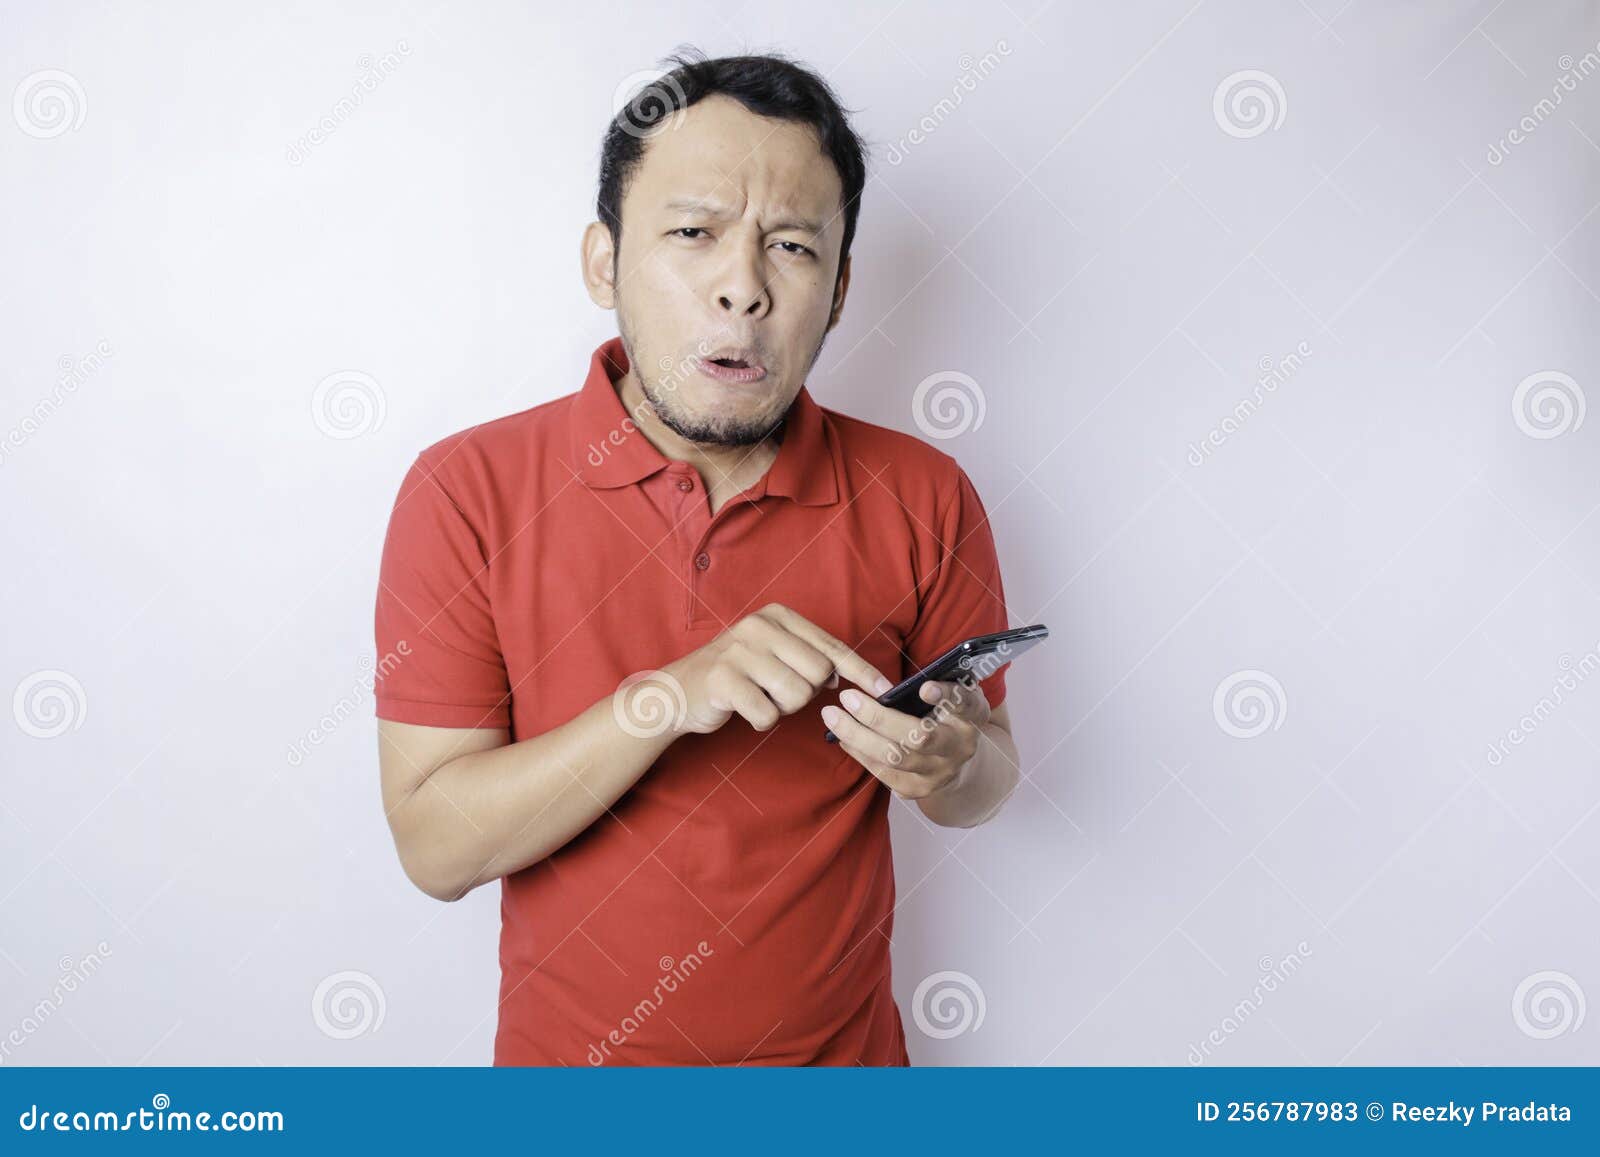 Sad Asian Man Has Bad Online Chat News And Feels Disappointed On The  Smartphone. Stock Photo, Picture and Royalty Free Image. Image 175416709.